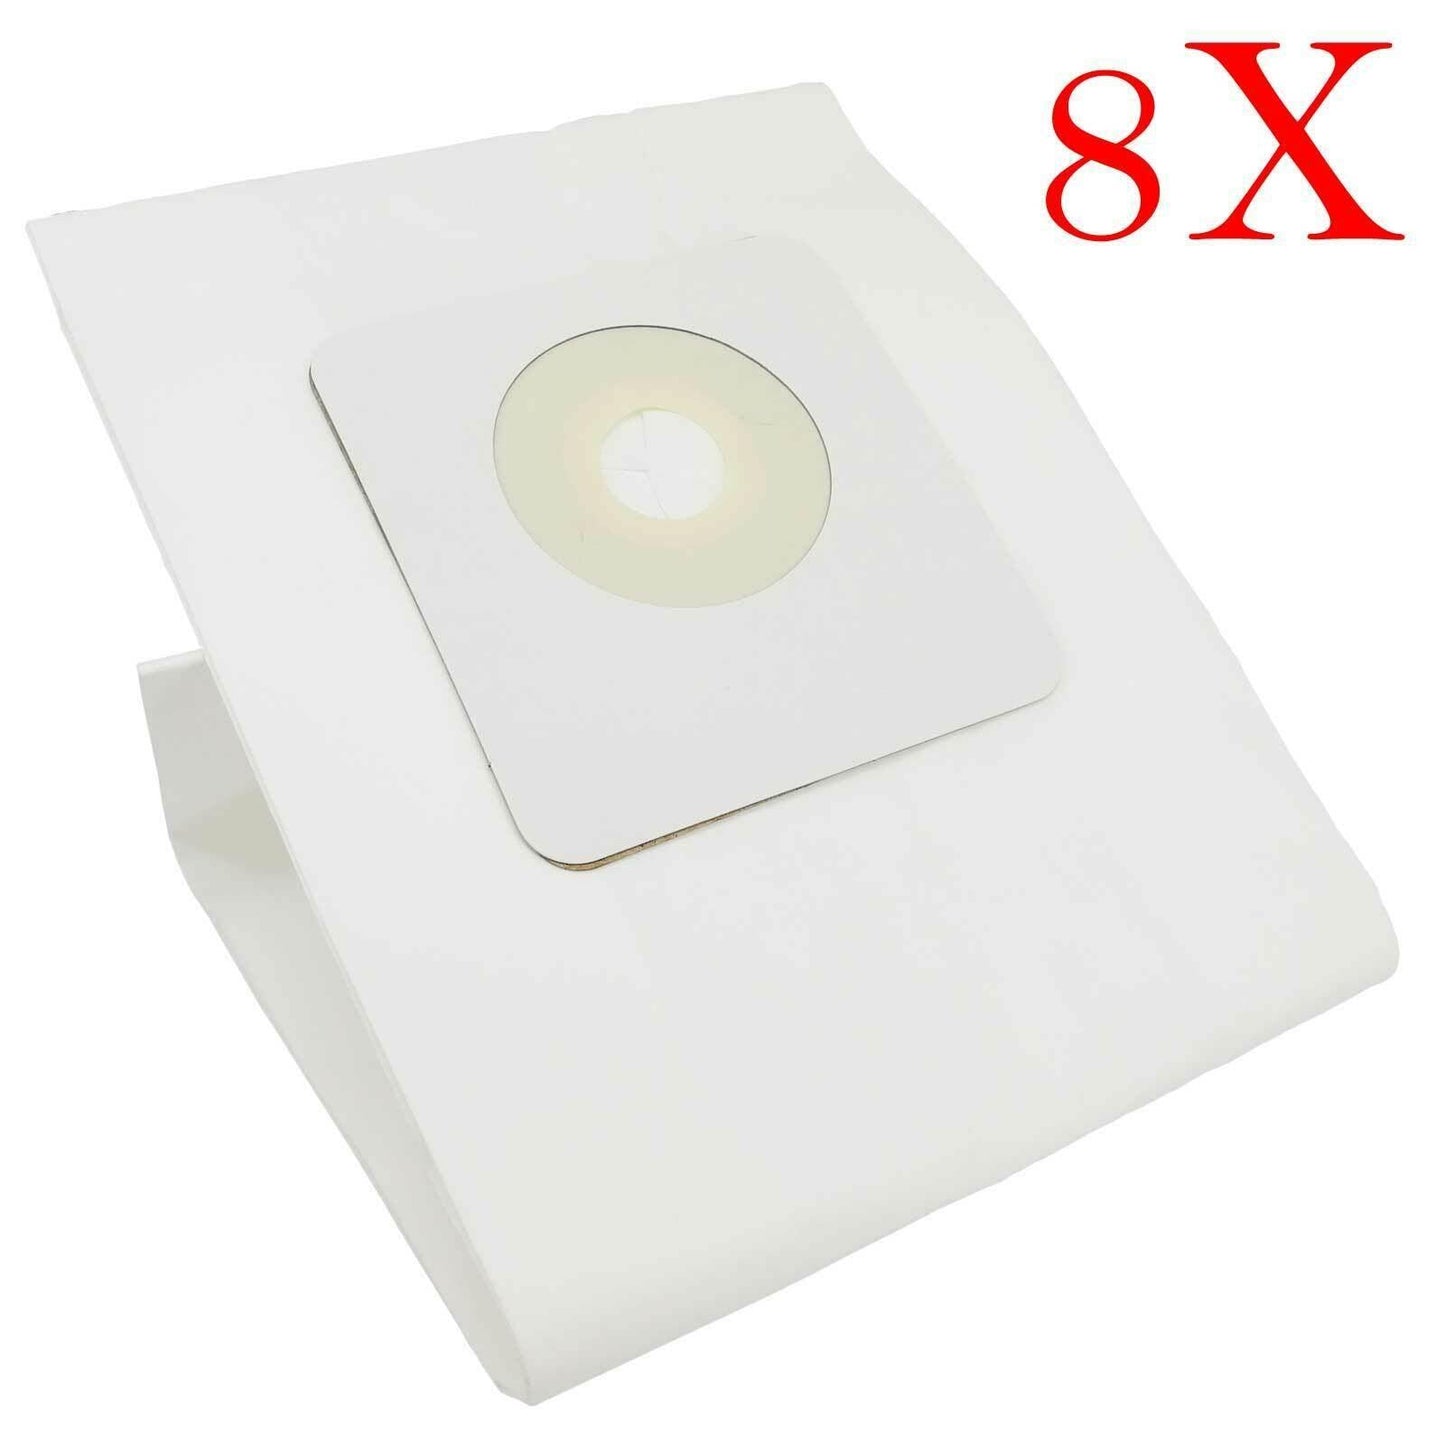 8X Ducted Central Vacuum Paper Filter Bag For Lux / Ecovac JL110509 Cleaner Sparesbarn